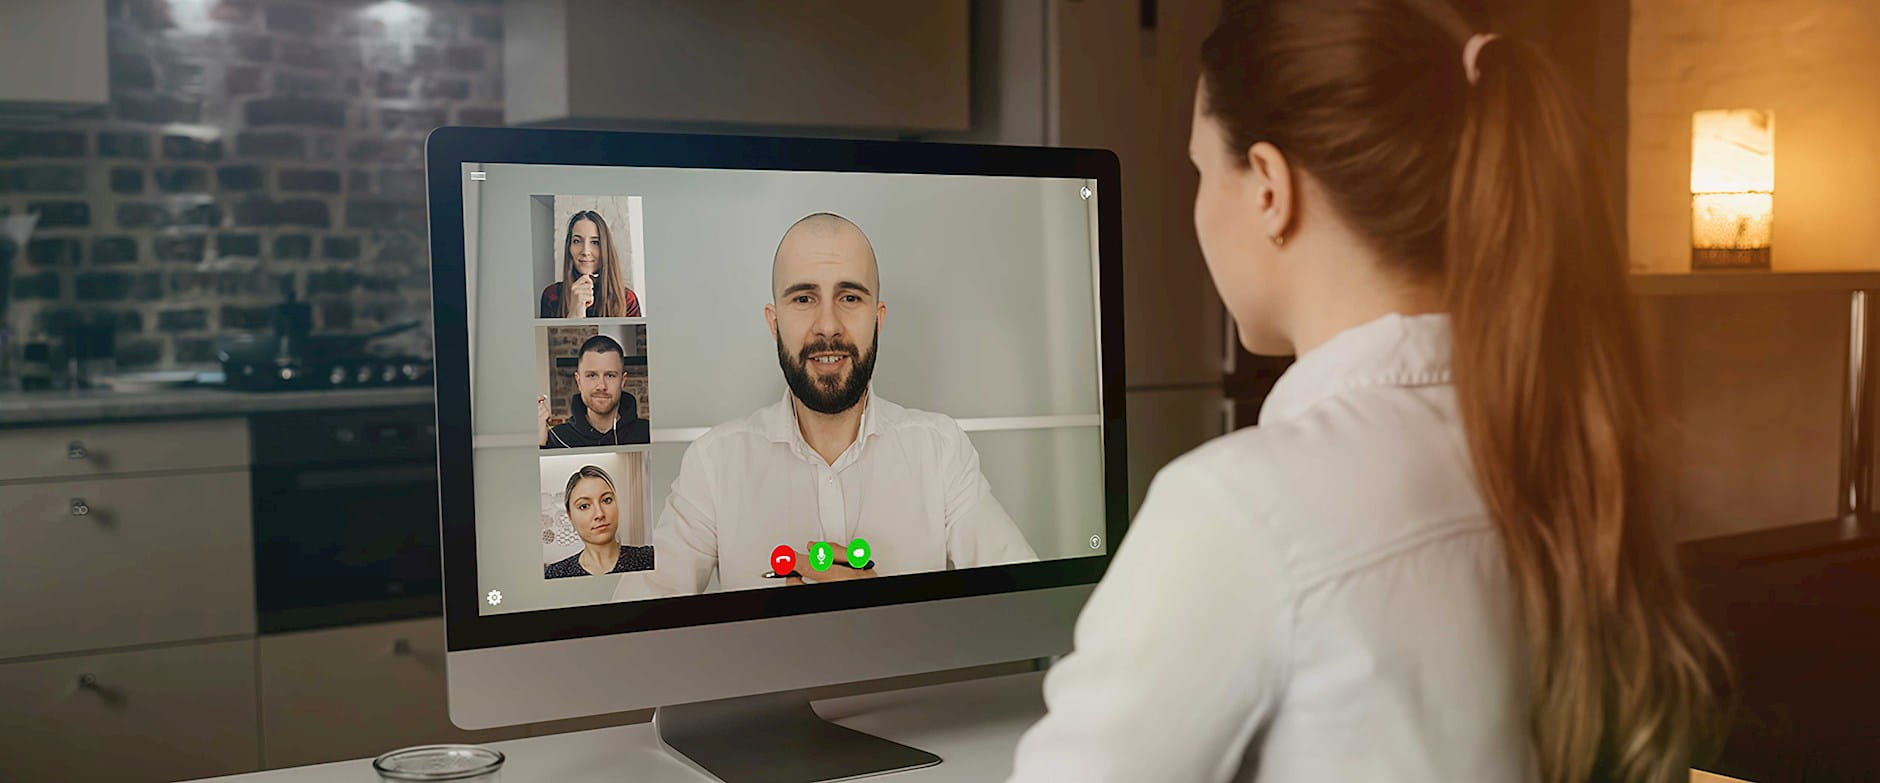 Woman at a computer in a zoom meeting